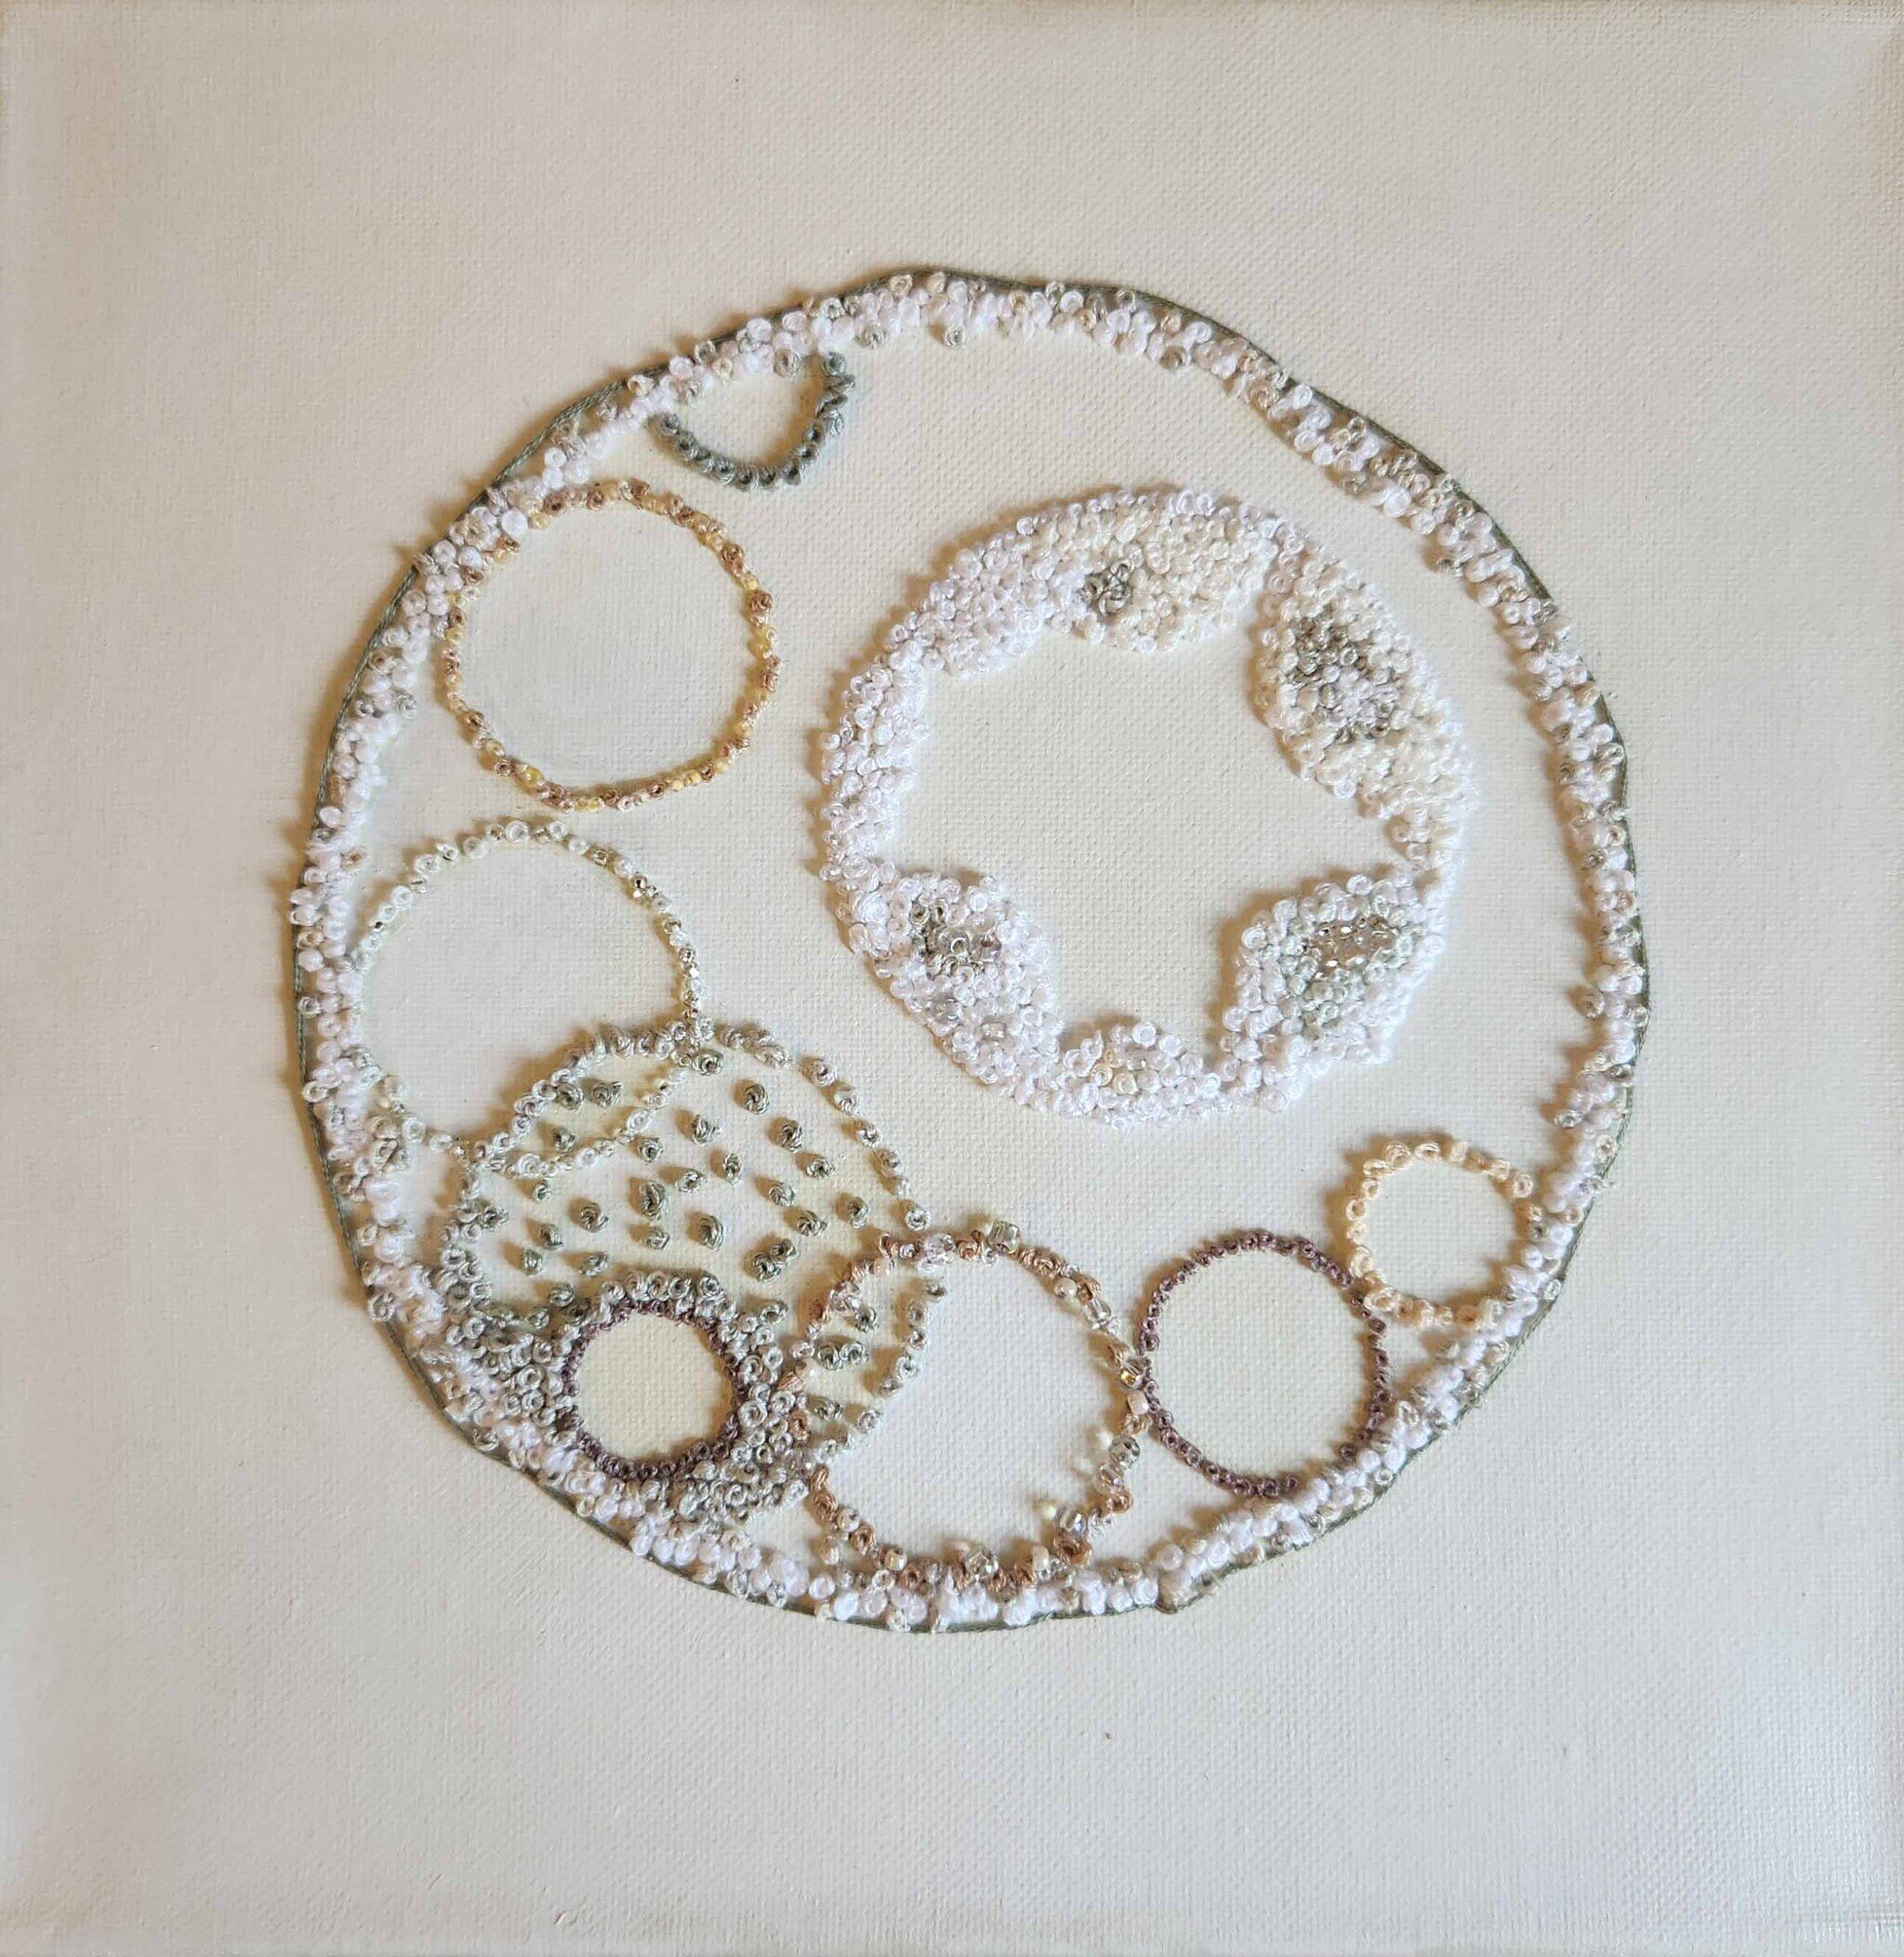 Pearls embroidered onto white fabric in circular shapes.